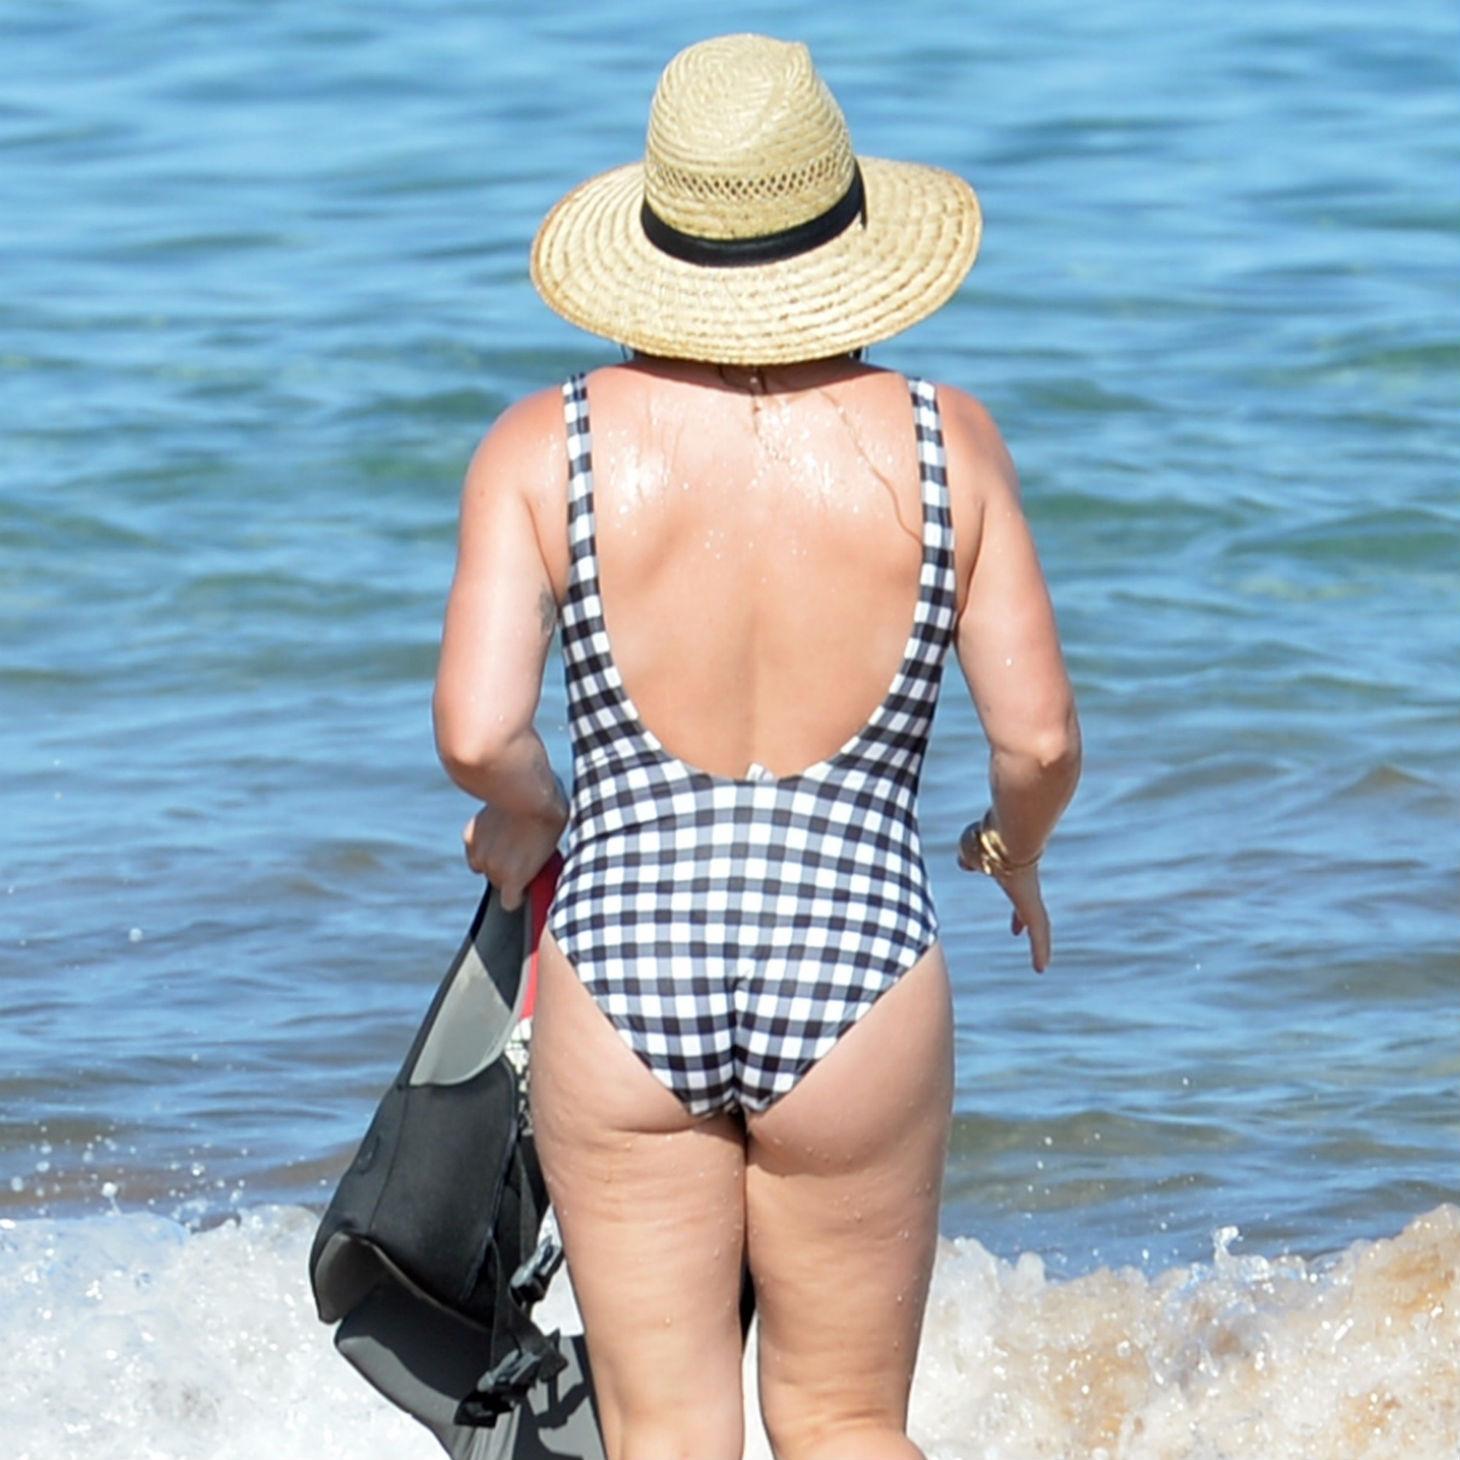 Best of Hillary bathing suit